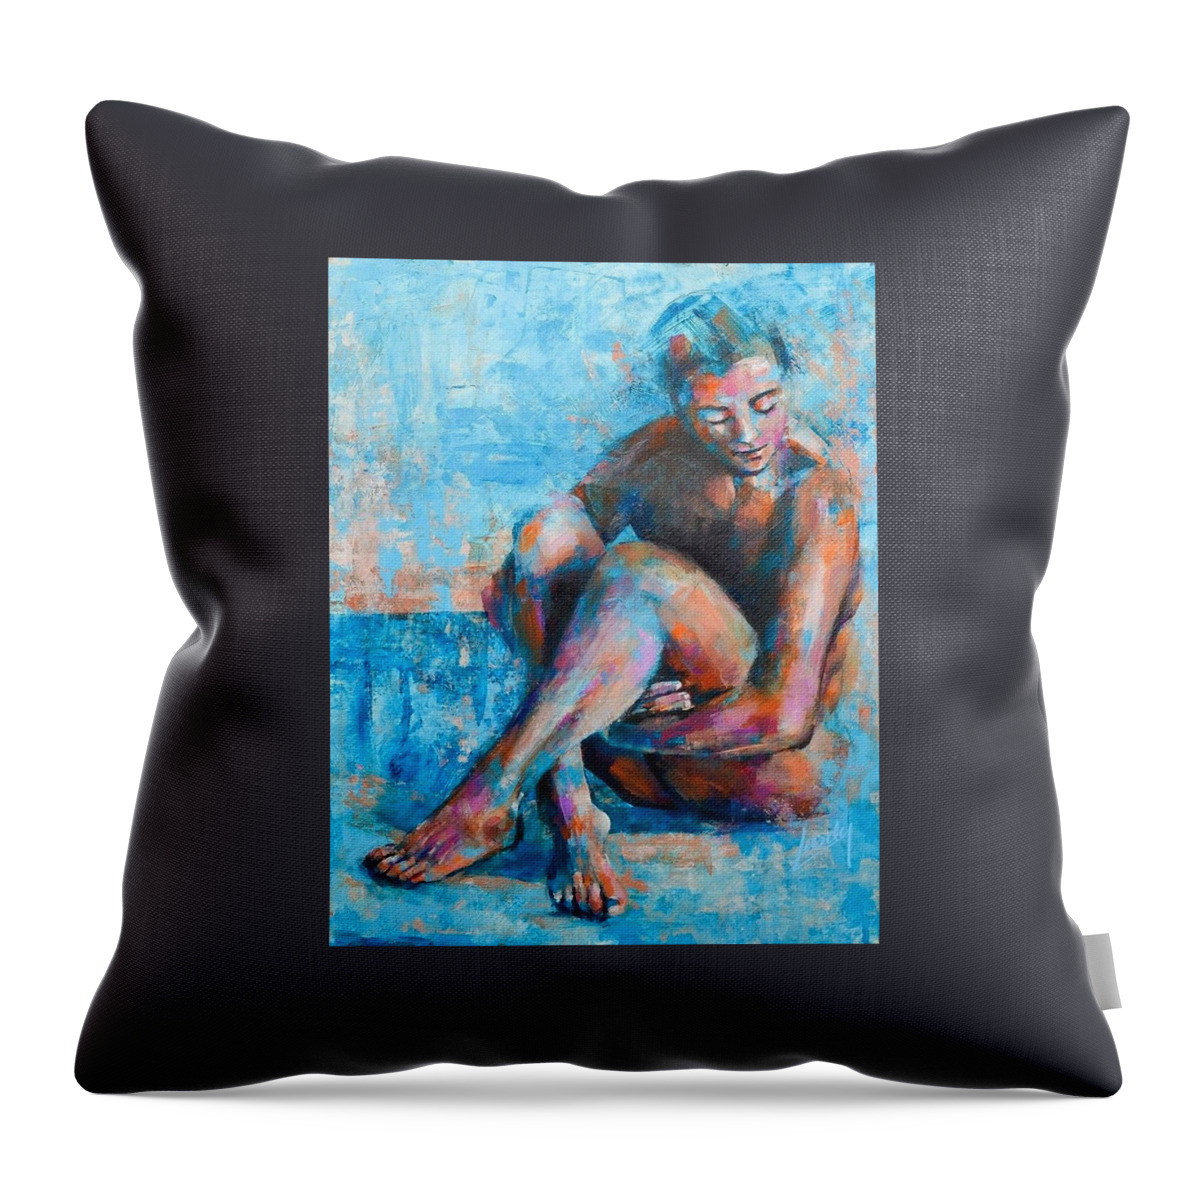  Throw Pillow featuring the painting Embracing Me by Luzdy Rivera